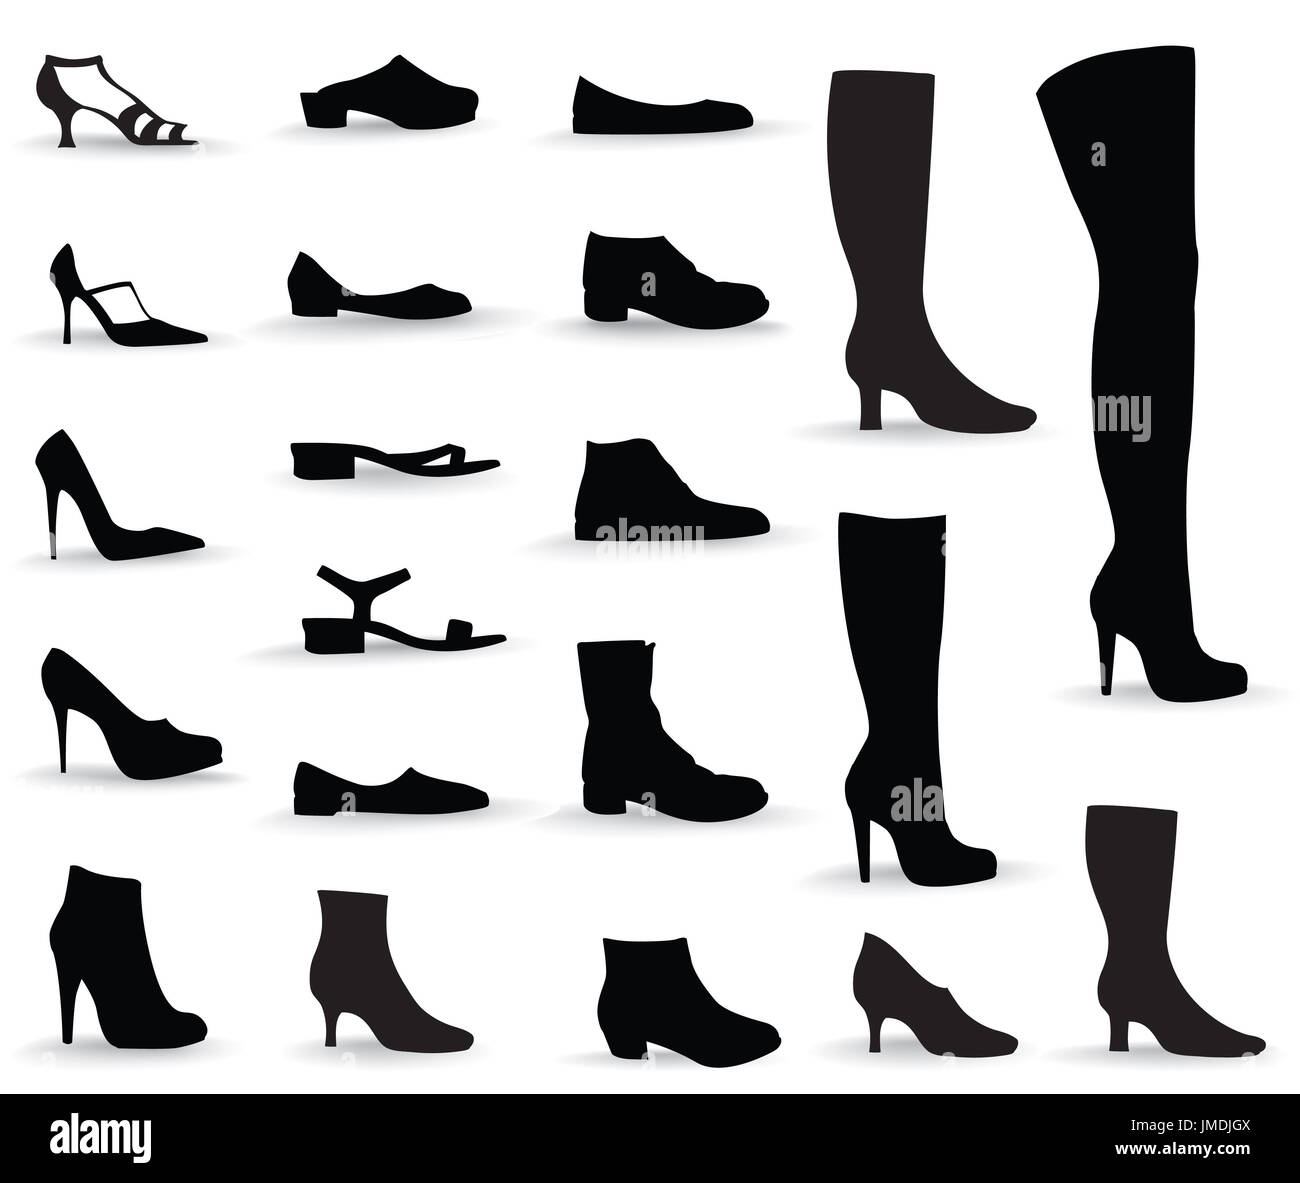 Shoes icon set. Fashion footwear boots silhouettes collection Stock Photo